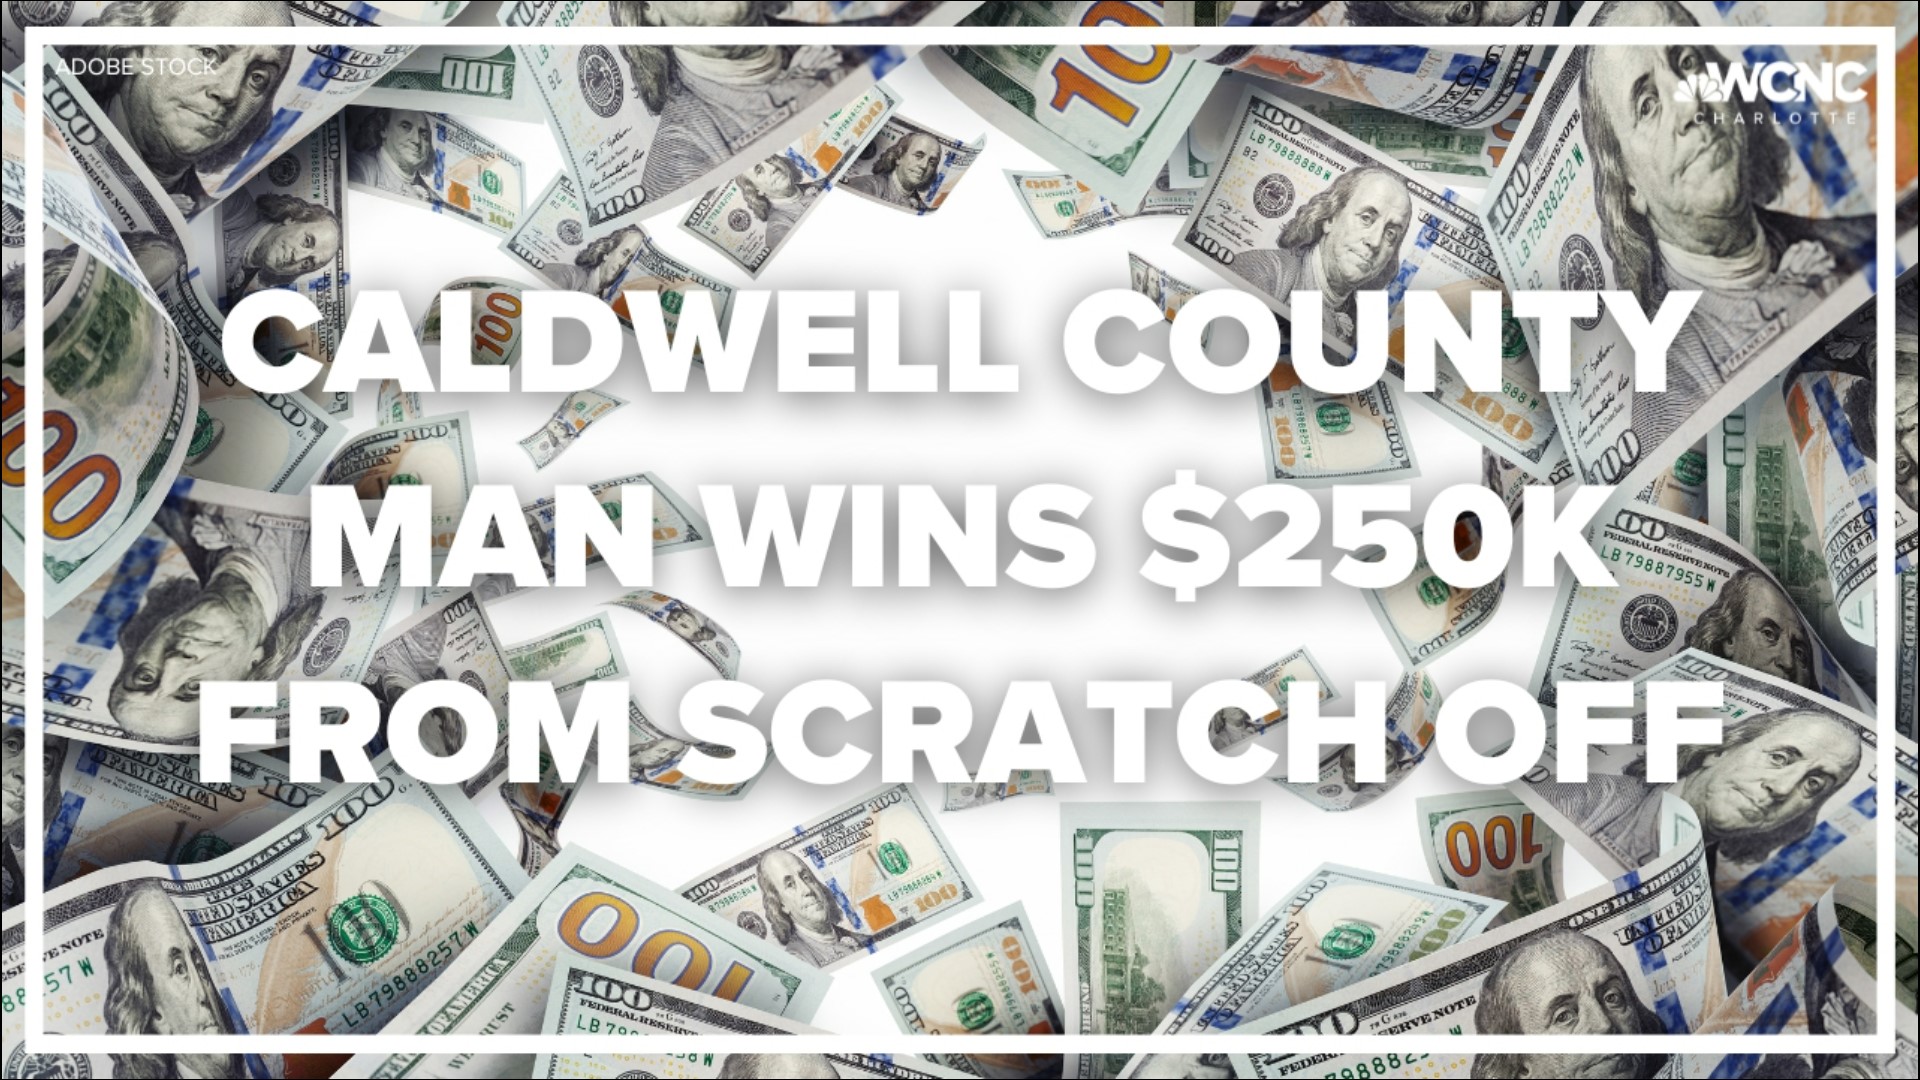 Trending tonight, a Caldwell County man winning big from the lottery!